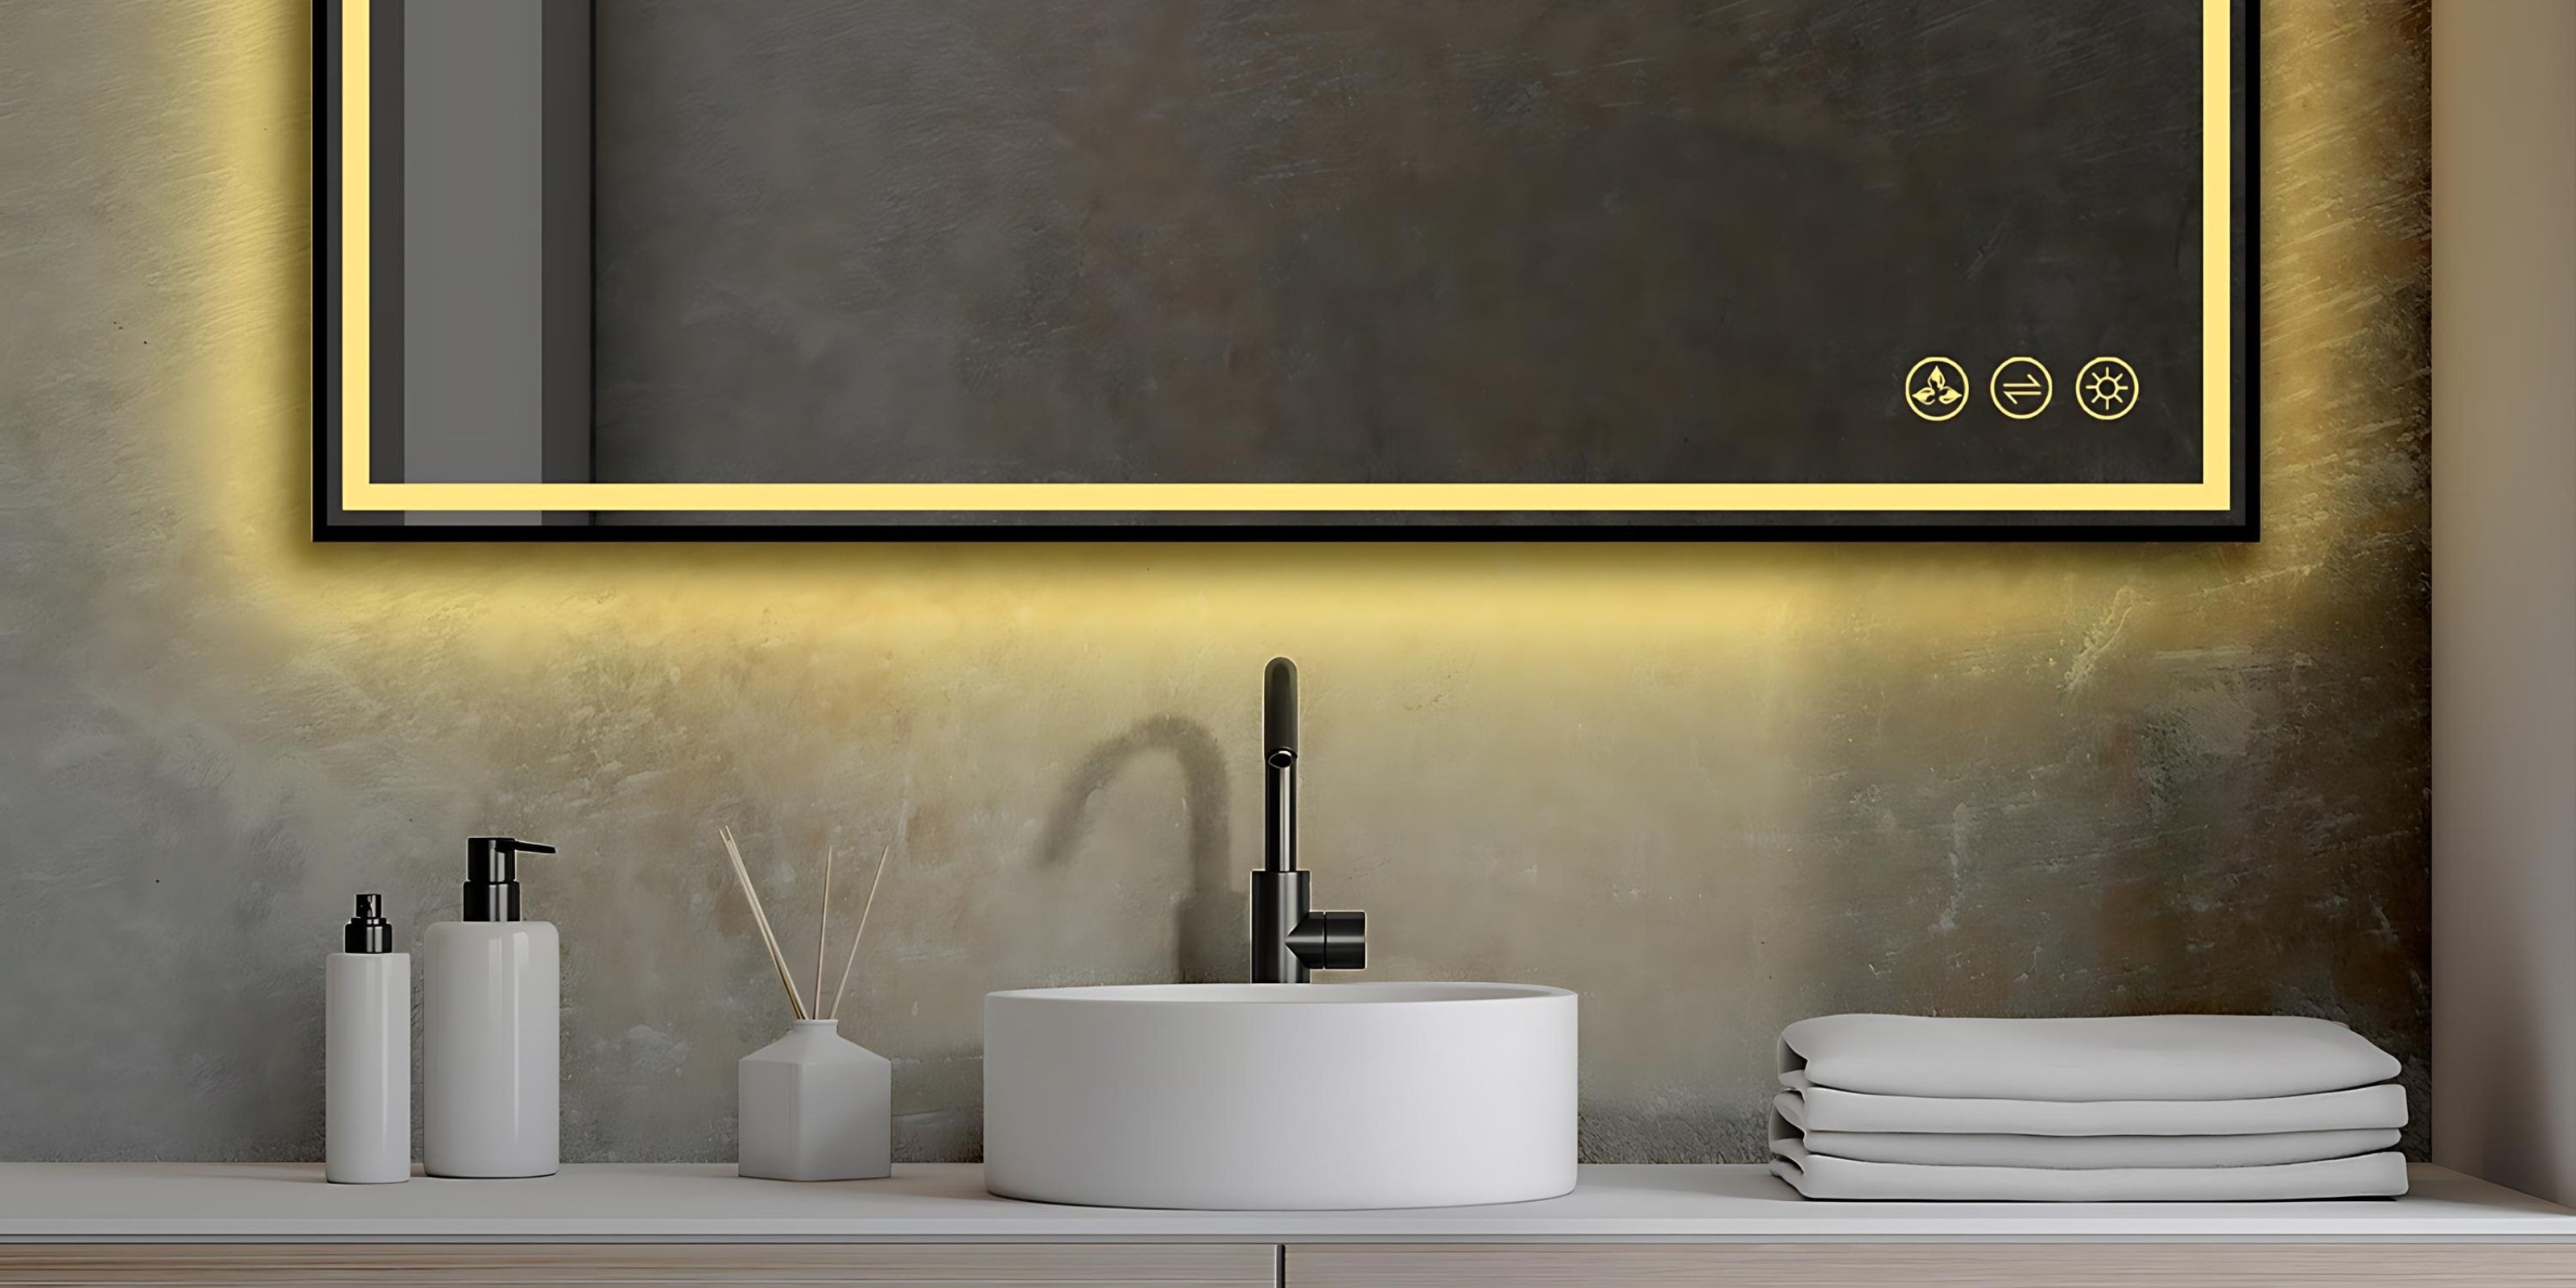 The Stellar LED Mirror with Defogger for your next bathroom makeover